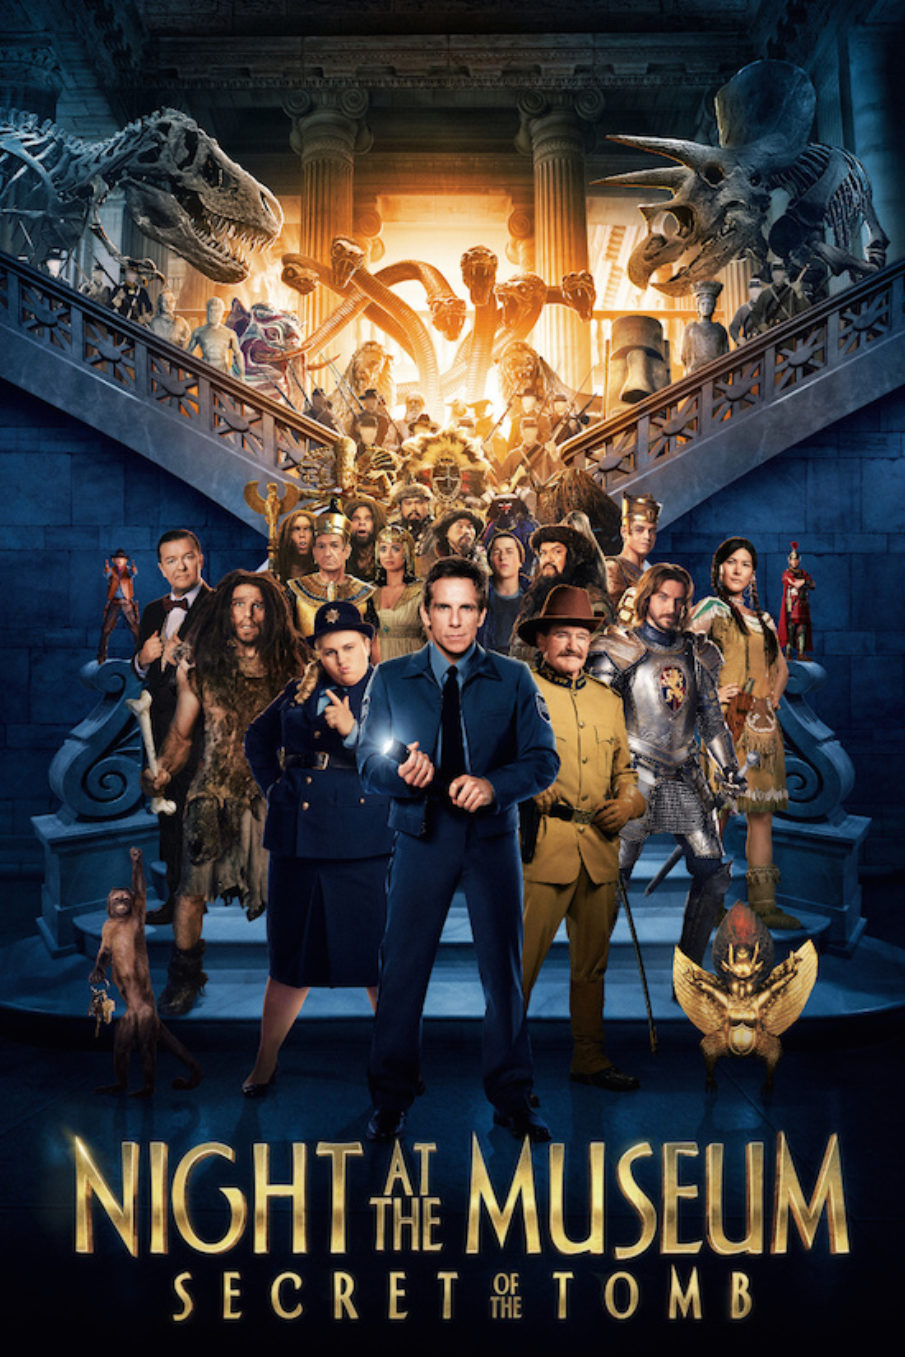 Movie Diary: Night at the Museum: Secret of the Tomb (2014)